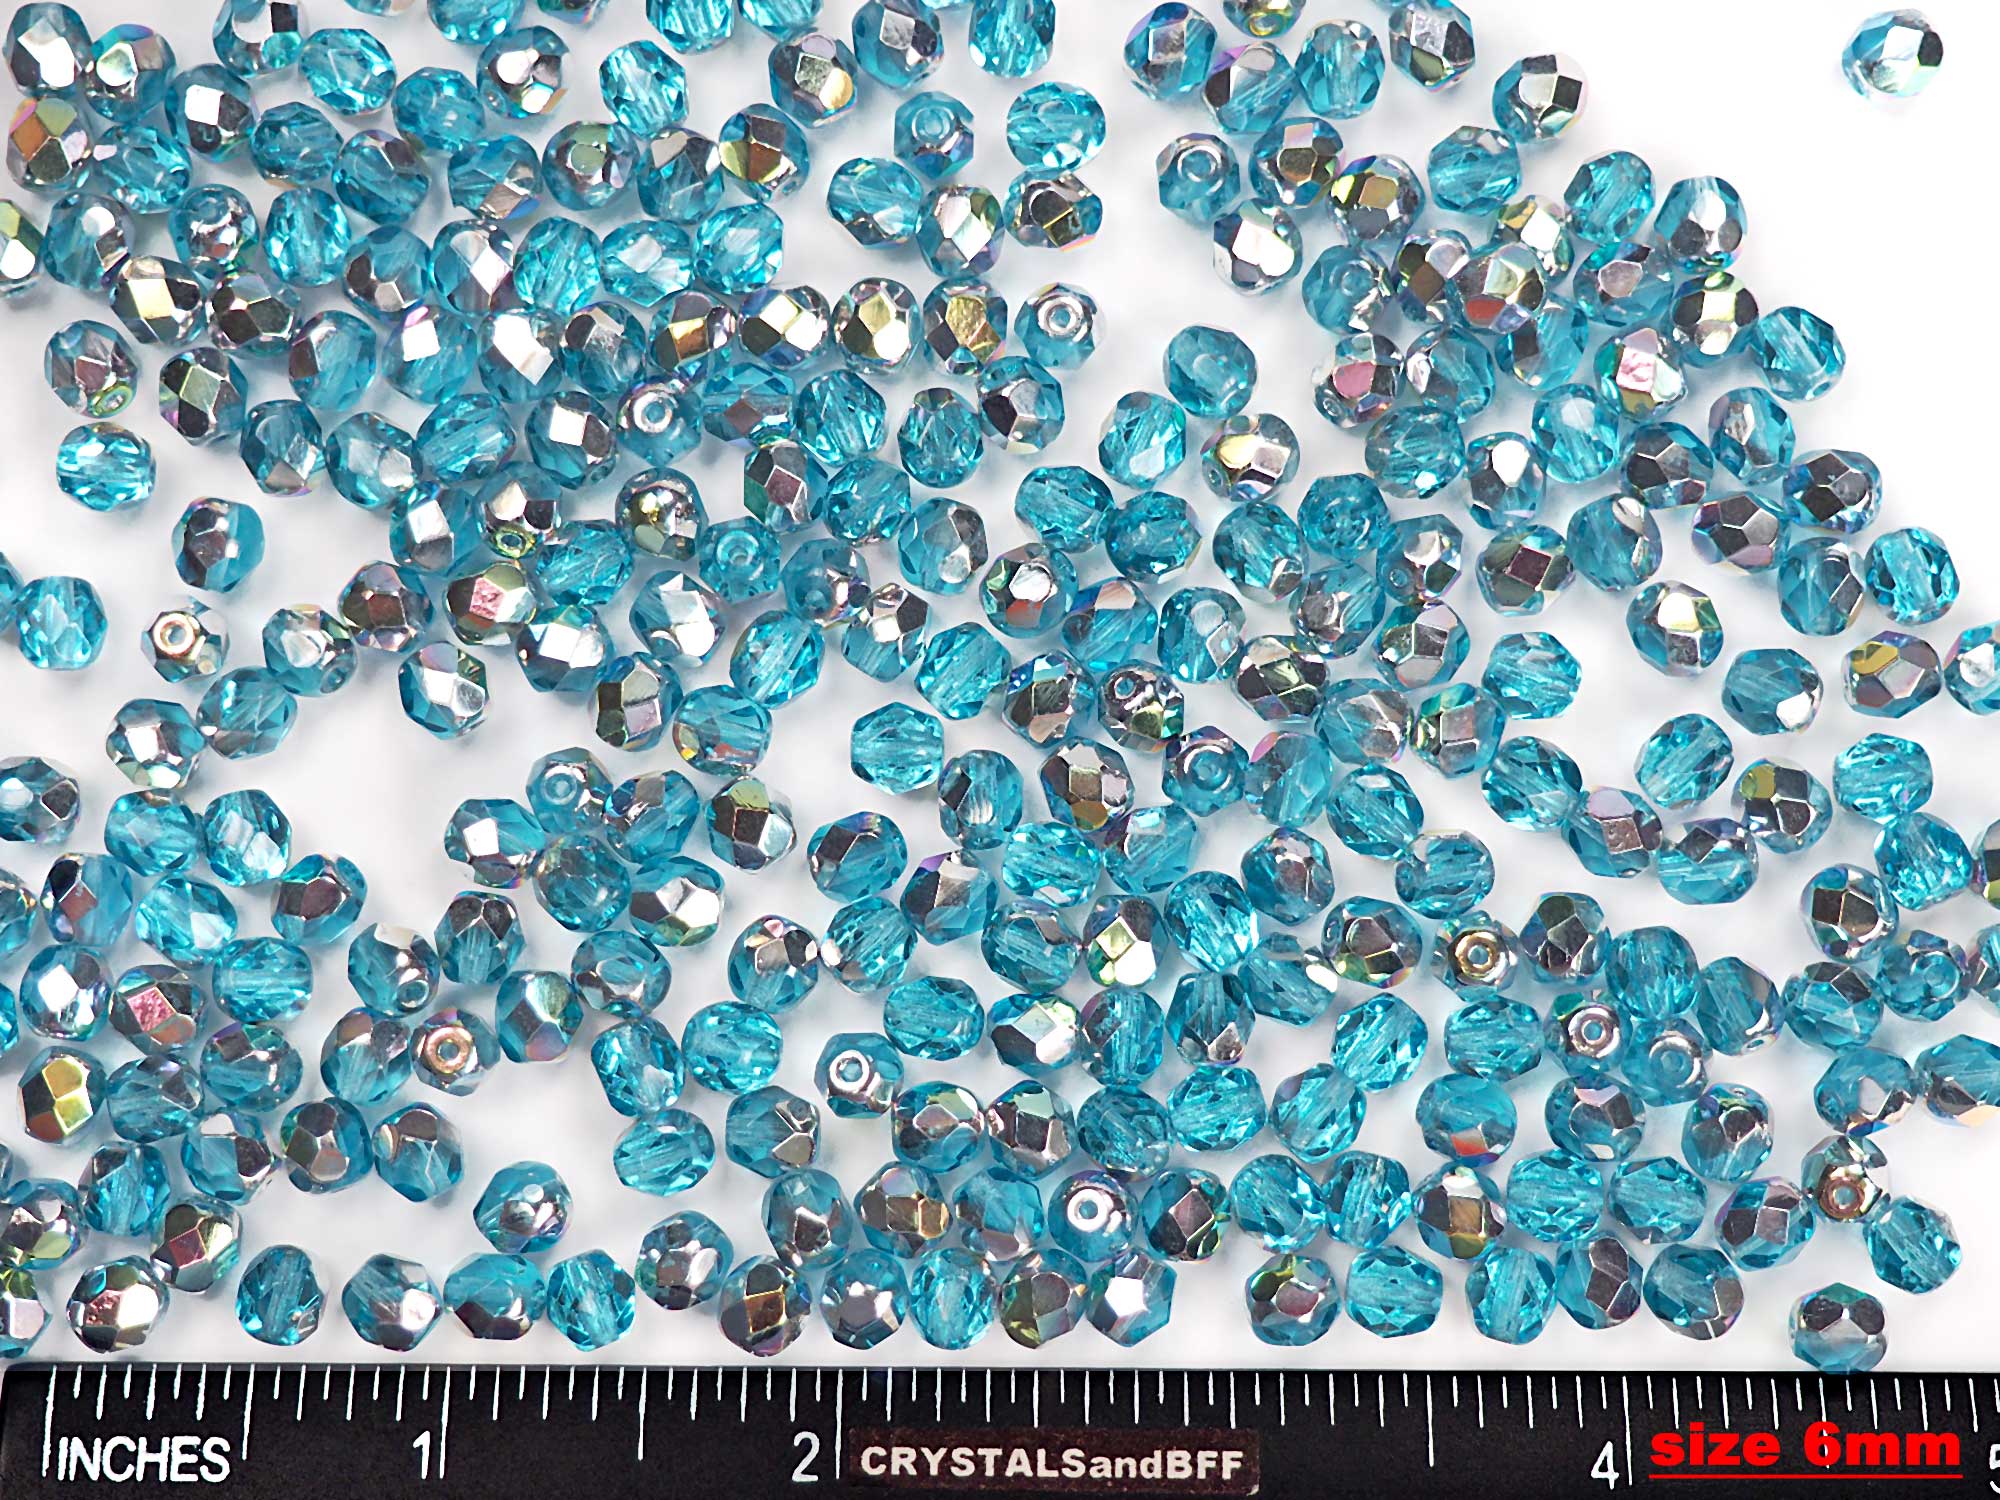 Aqua VL Vitrail Light coated, Czech Fire Polished Round Faceted Glass Beads, 16 inch strand, 4mm, 6mm